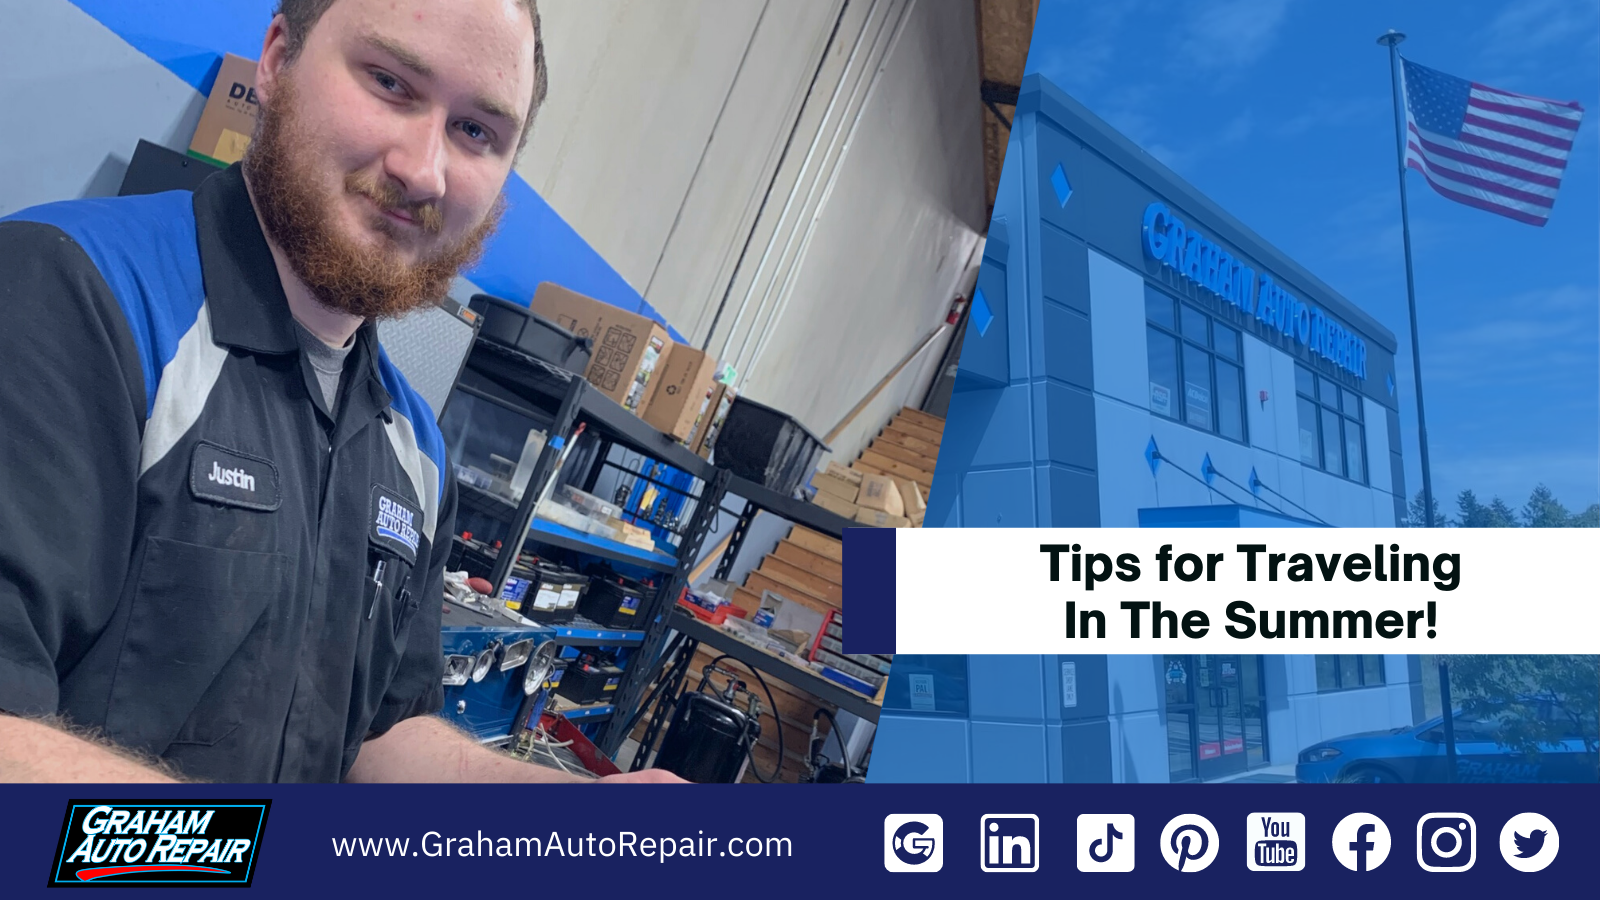 Tips for Traveling in the Summer at Graham Auto Repair 98338 98597